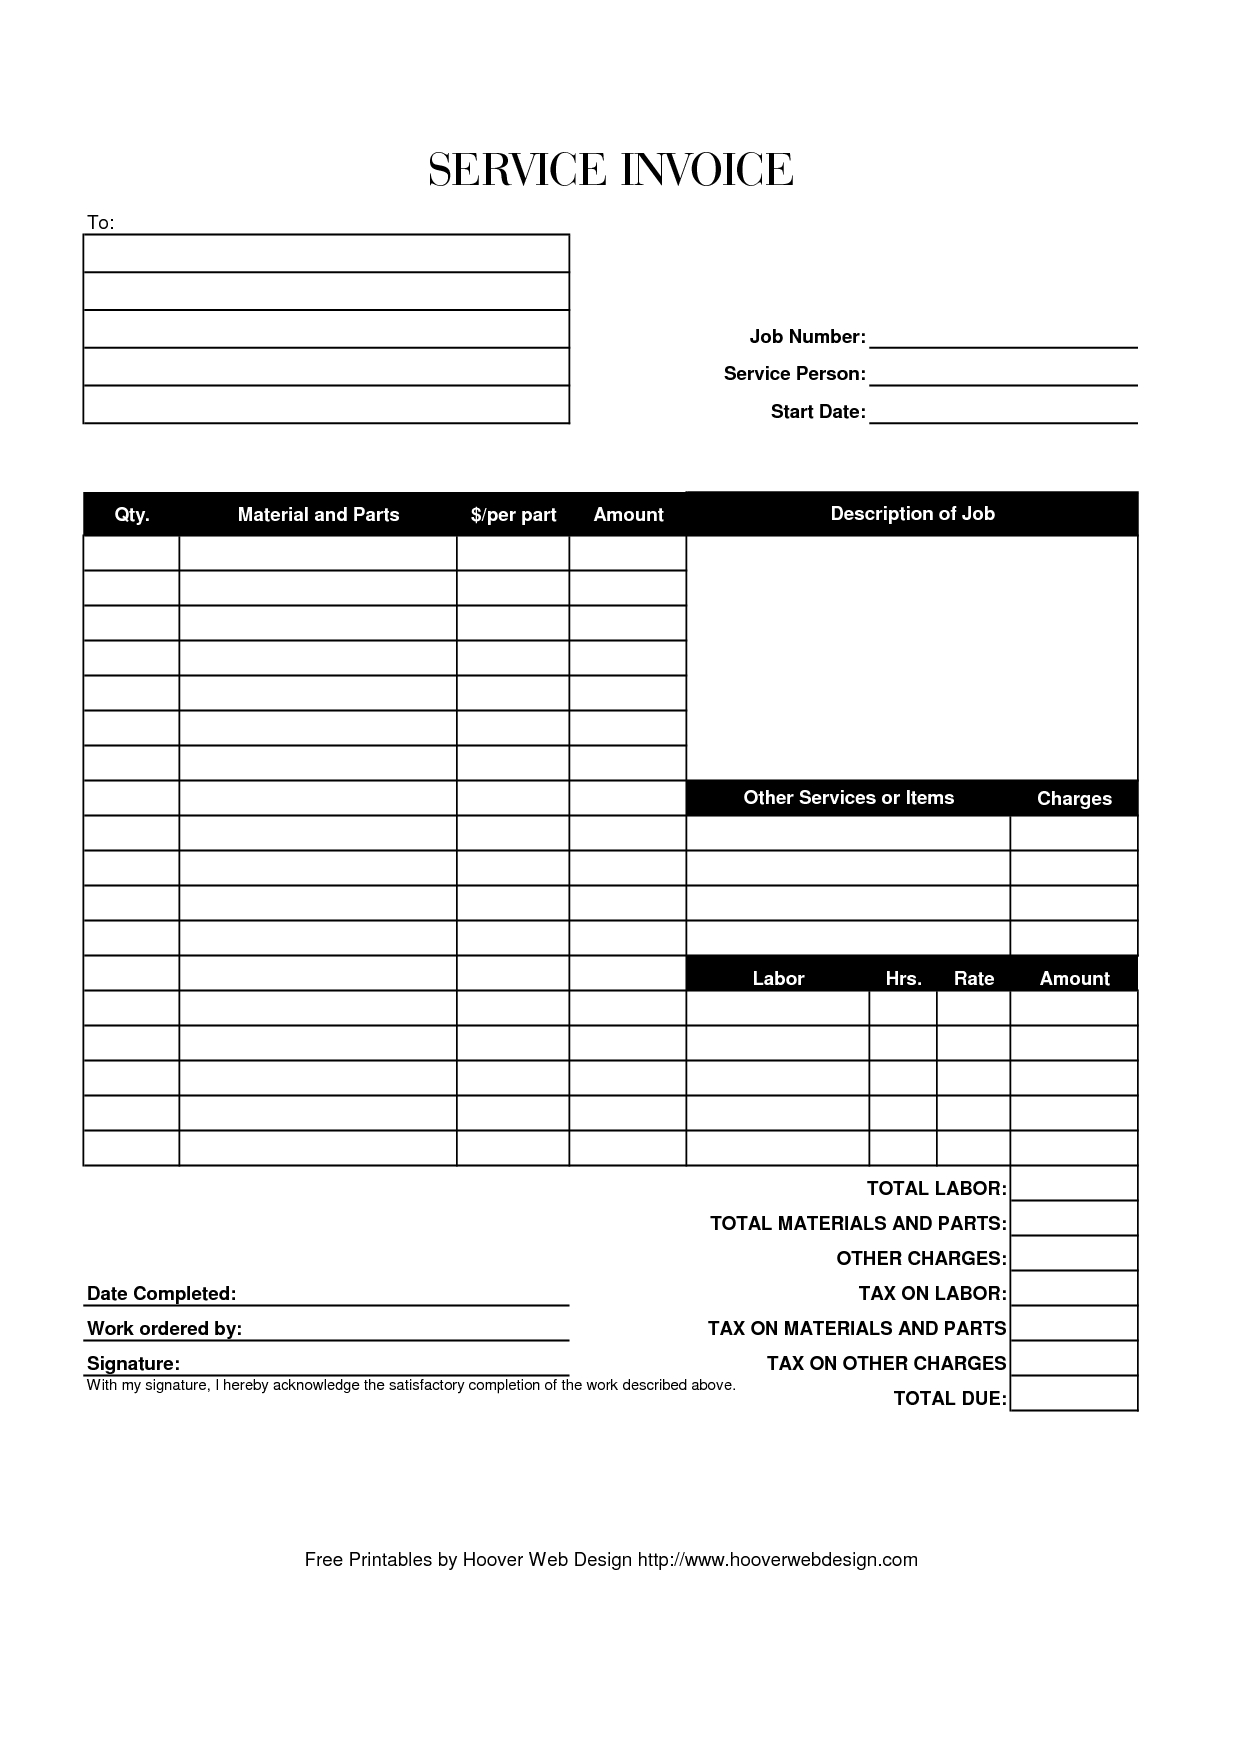 free printable invoice template and hoovers on pinterest printable invoice free